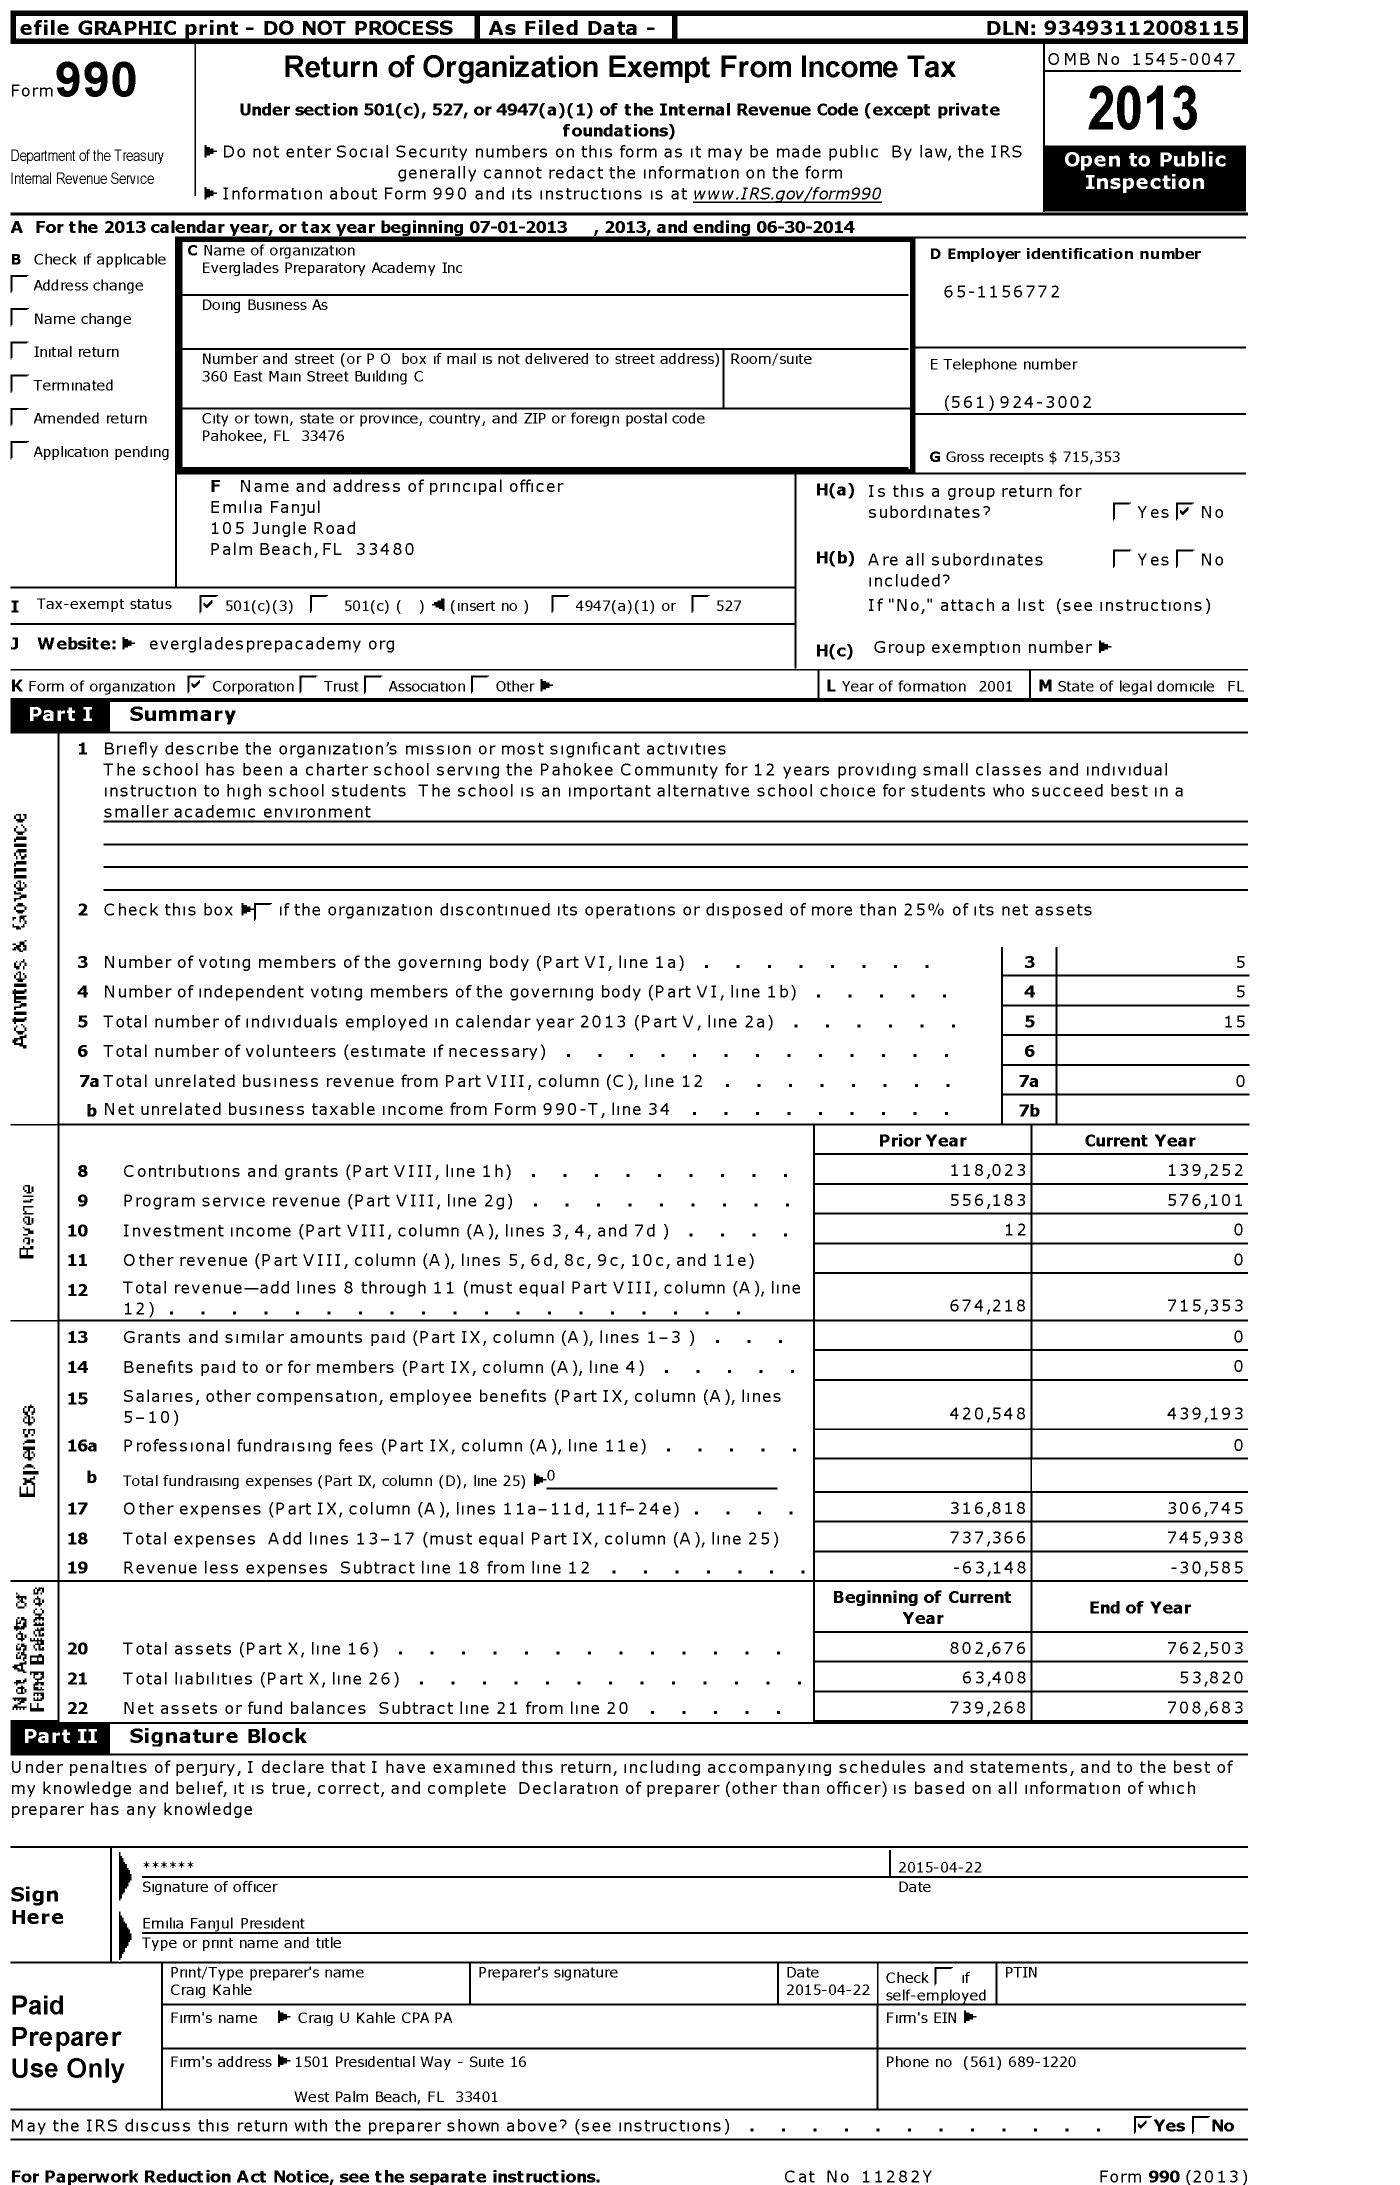 Image of first page of 2013 Form 990 for Everglades Preparatory Academy